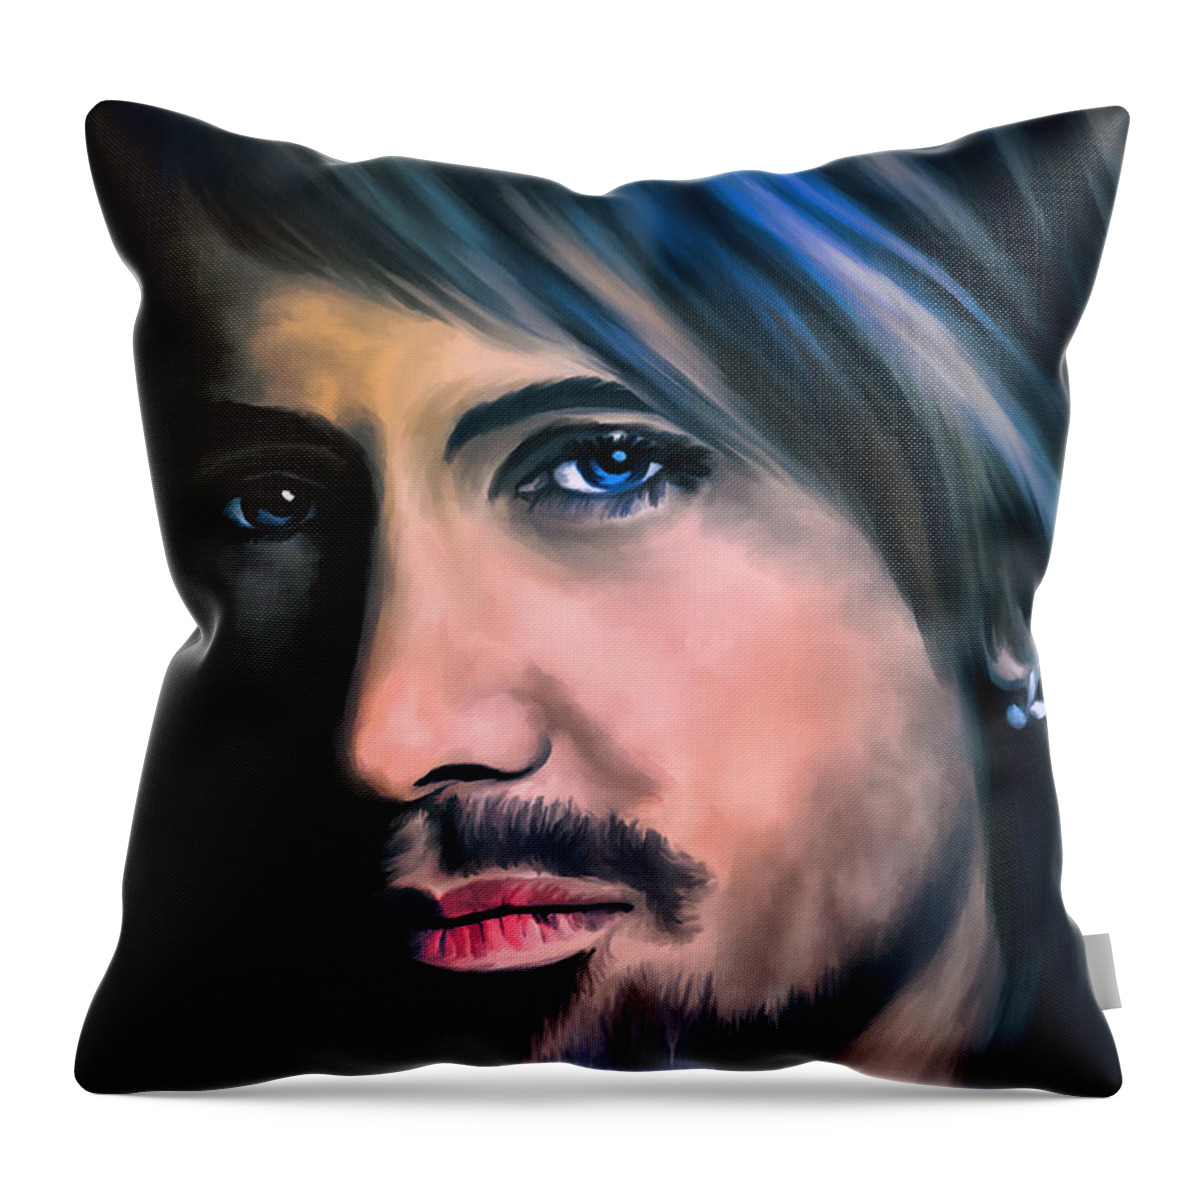 Face Throw Pillow featuring the painting Keith by Andrzej Szczerski